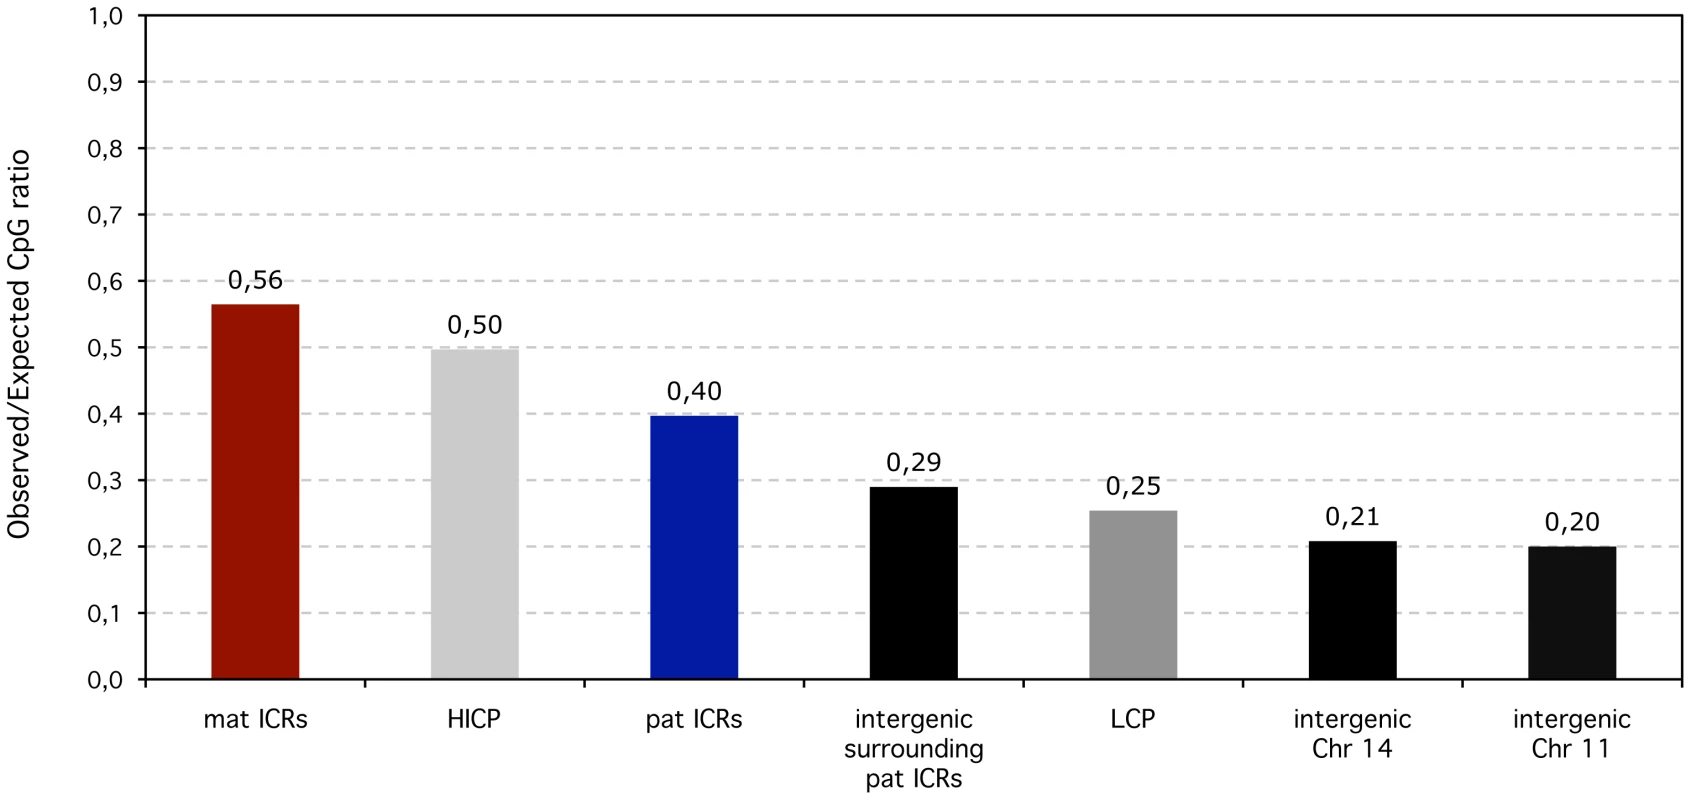 Observed over expected CpG ratios of ICRS compared to non-imprinted promoters and intergenic regions in the human lineage.